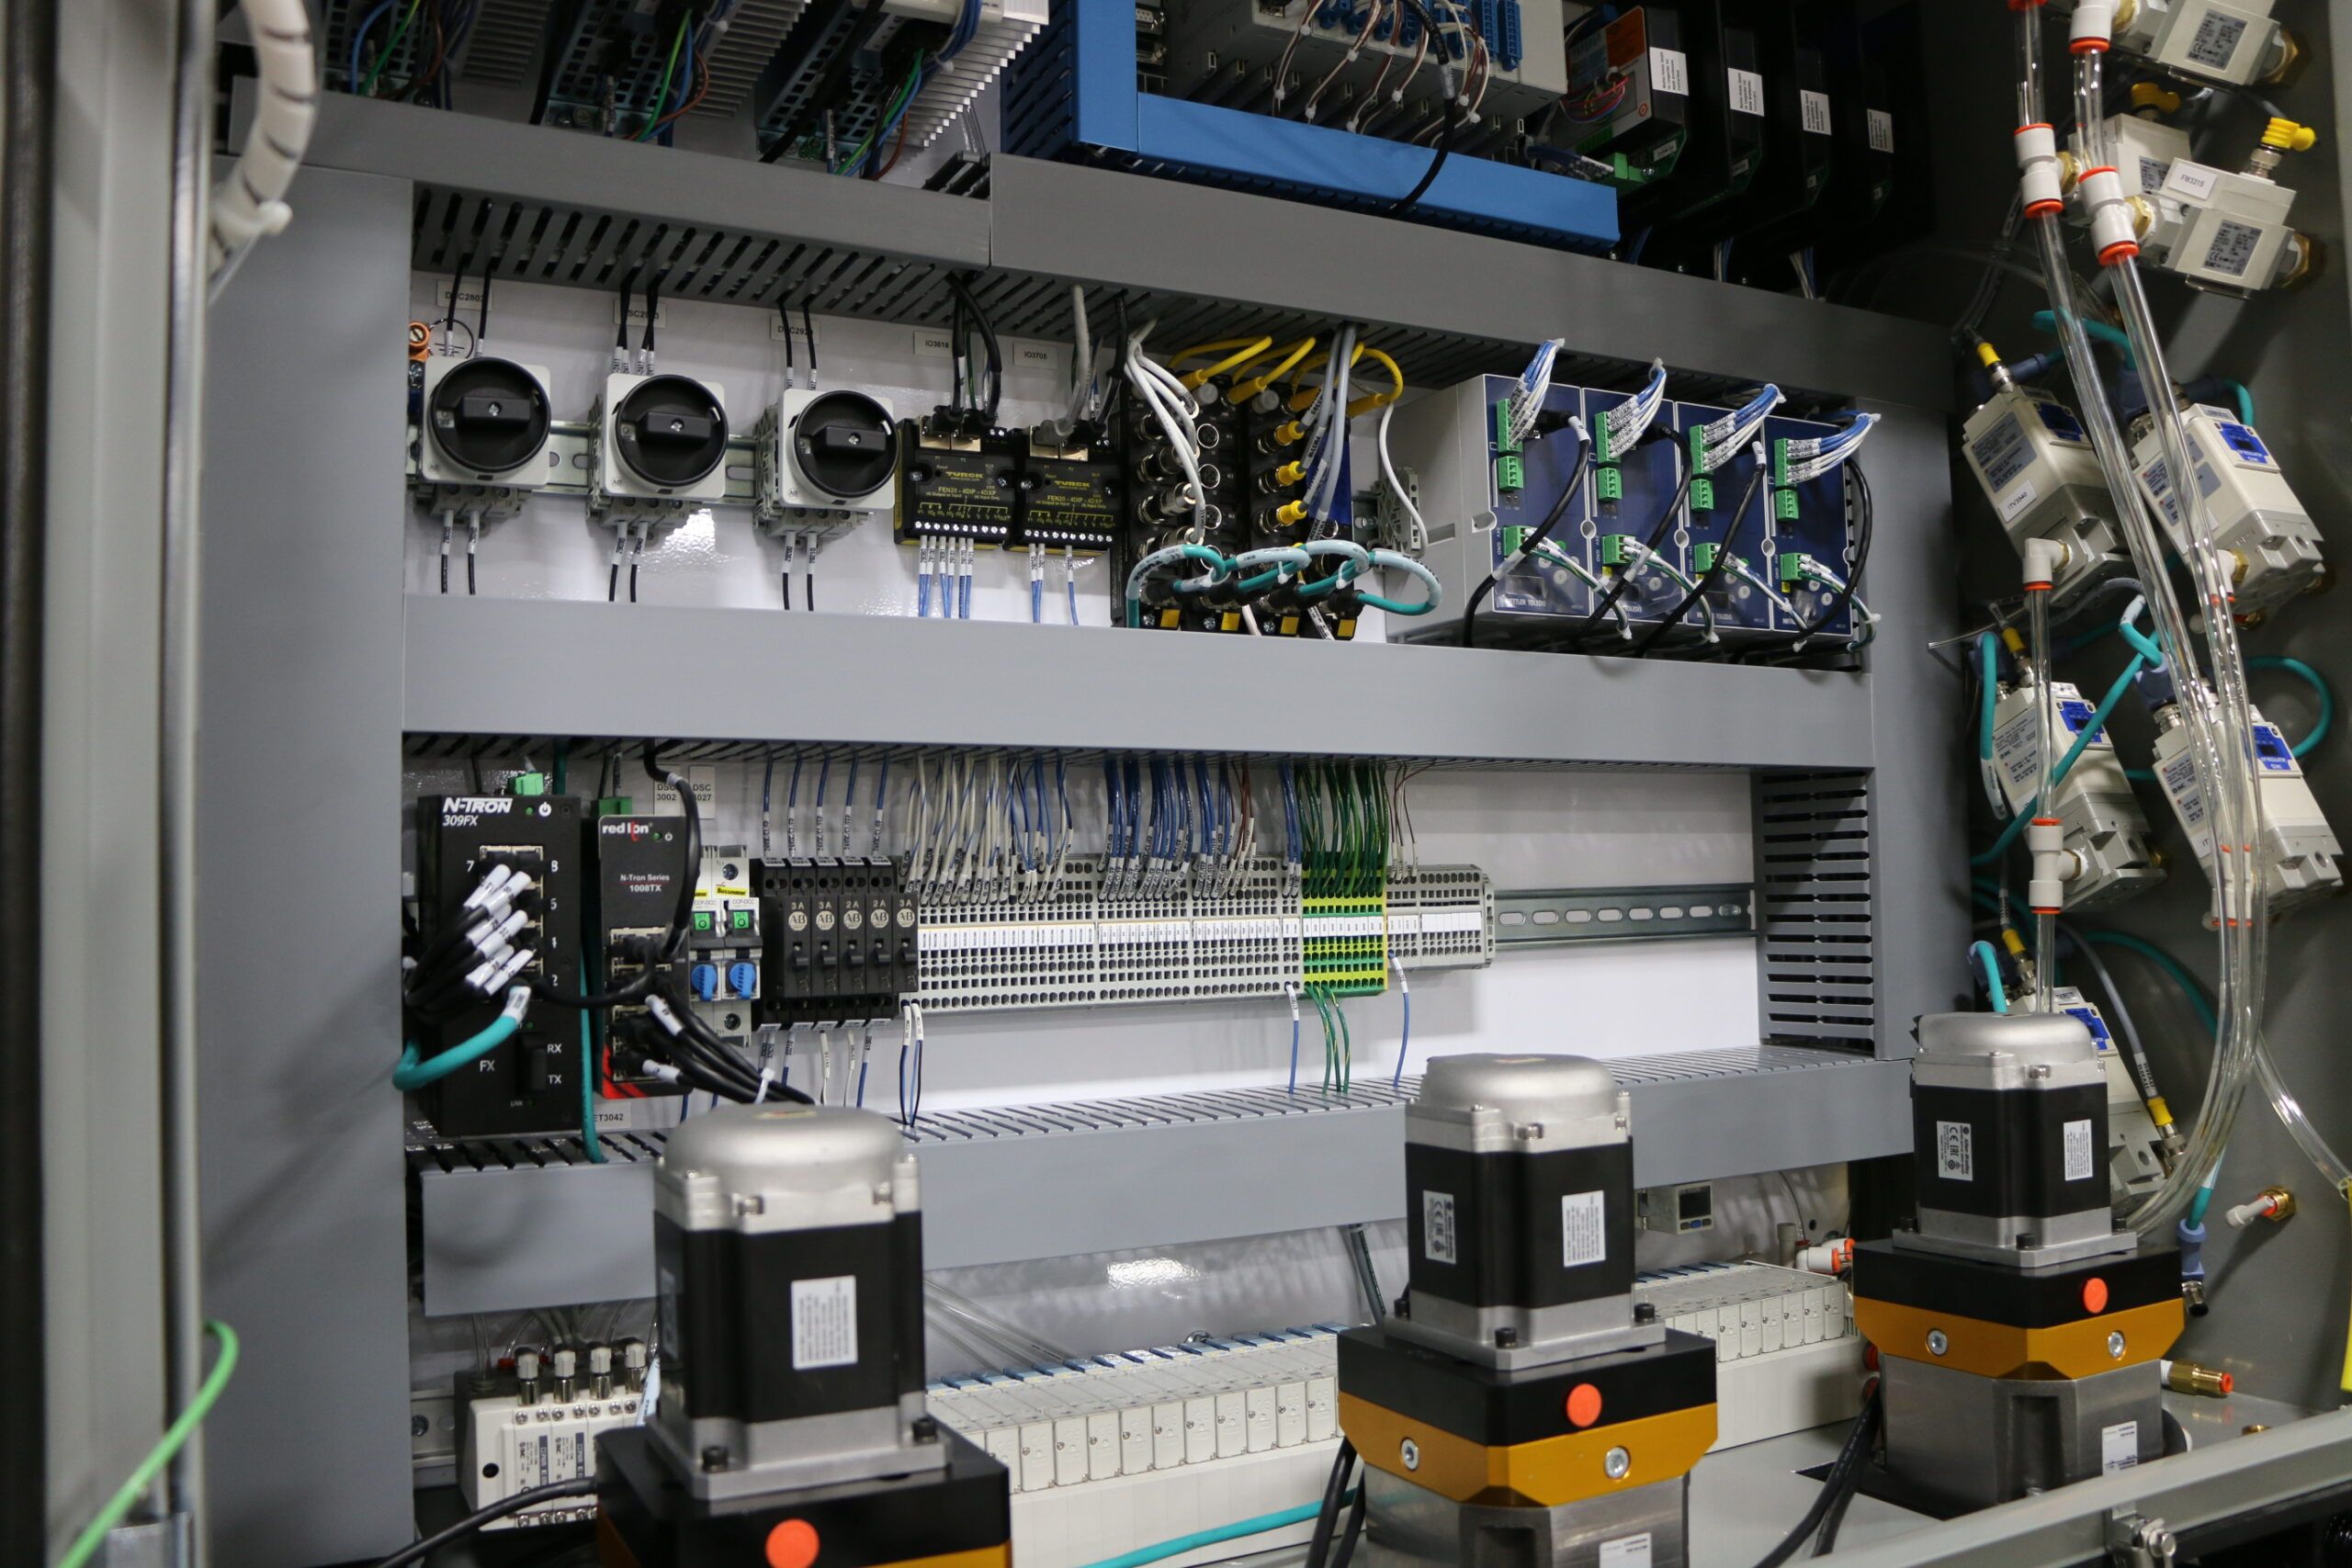 A close-up view of a electrical cabinet. 